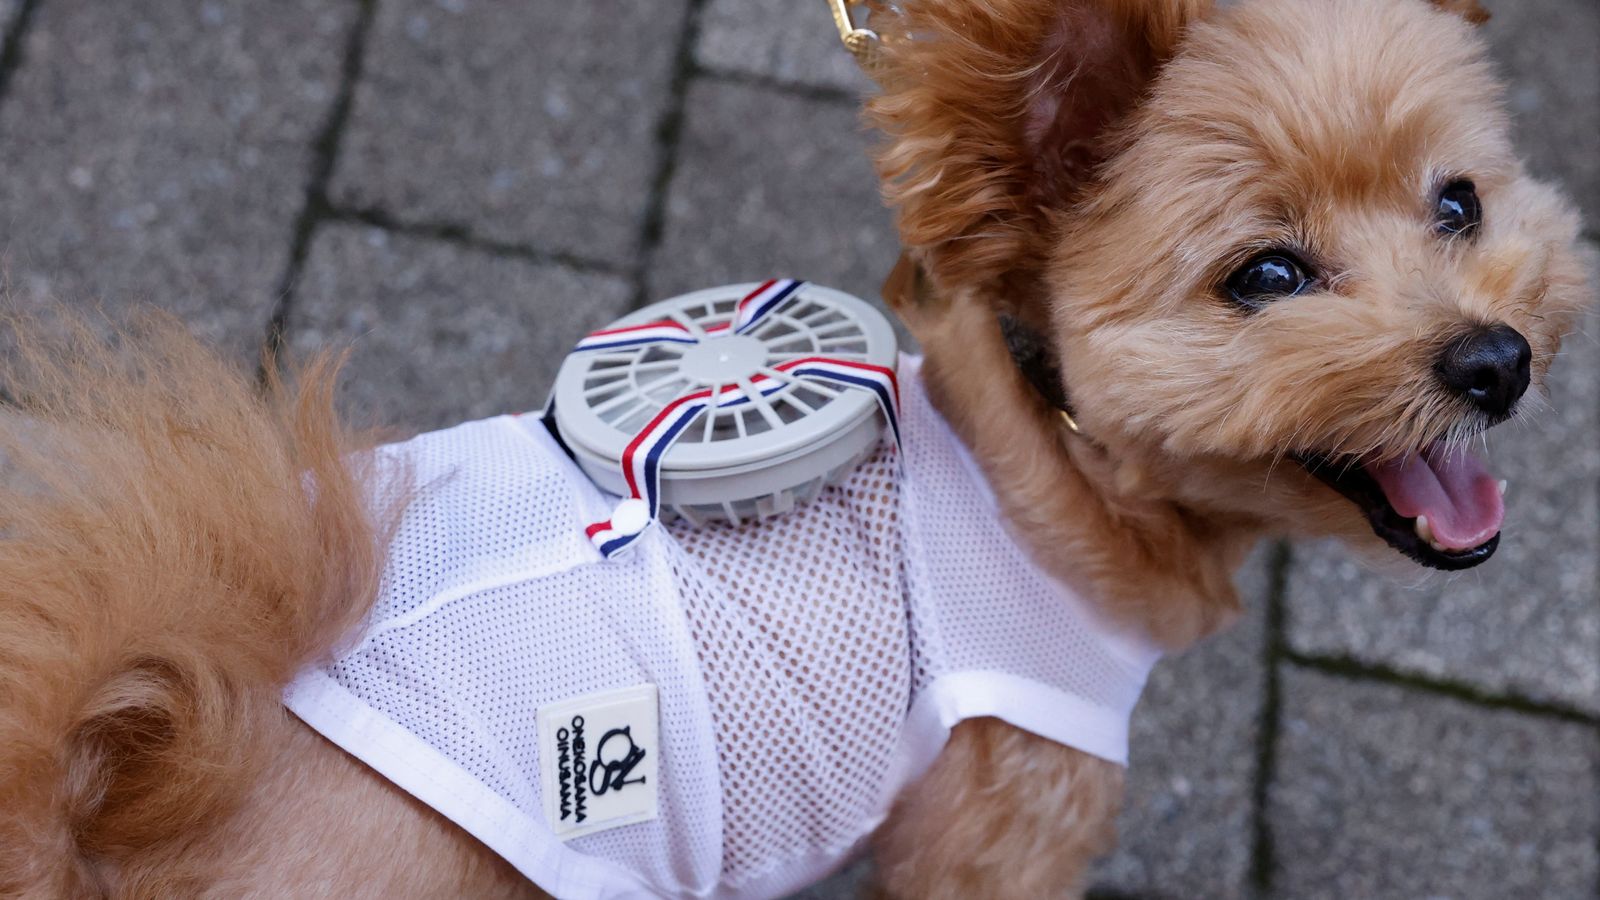 The heat's ruff on pets - but a new wearable fan in Japan is helping hot dogs keep cool